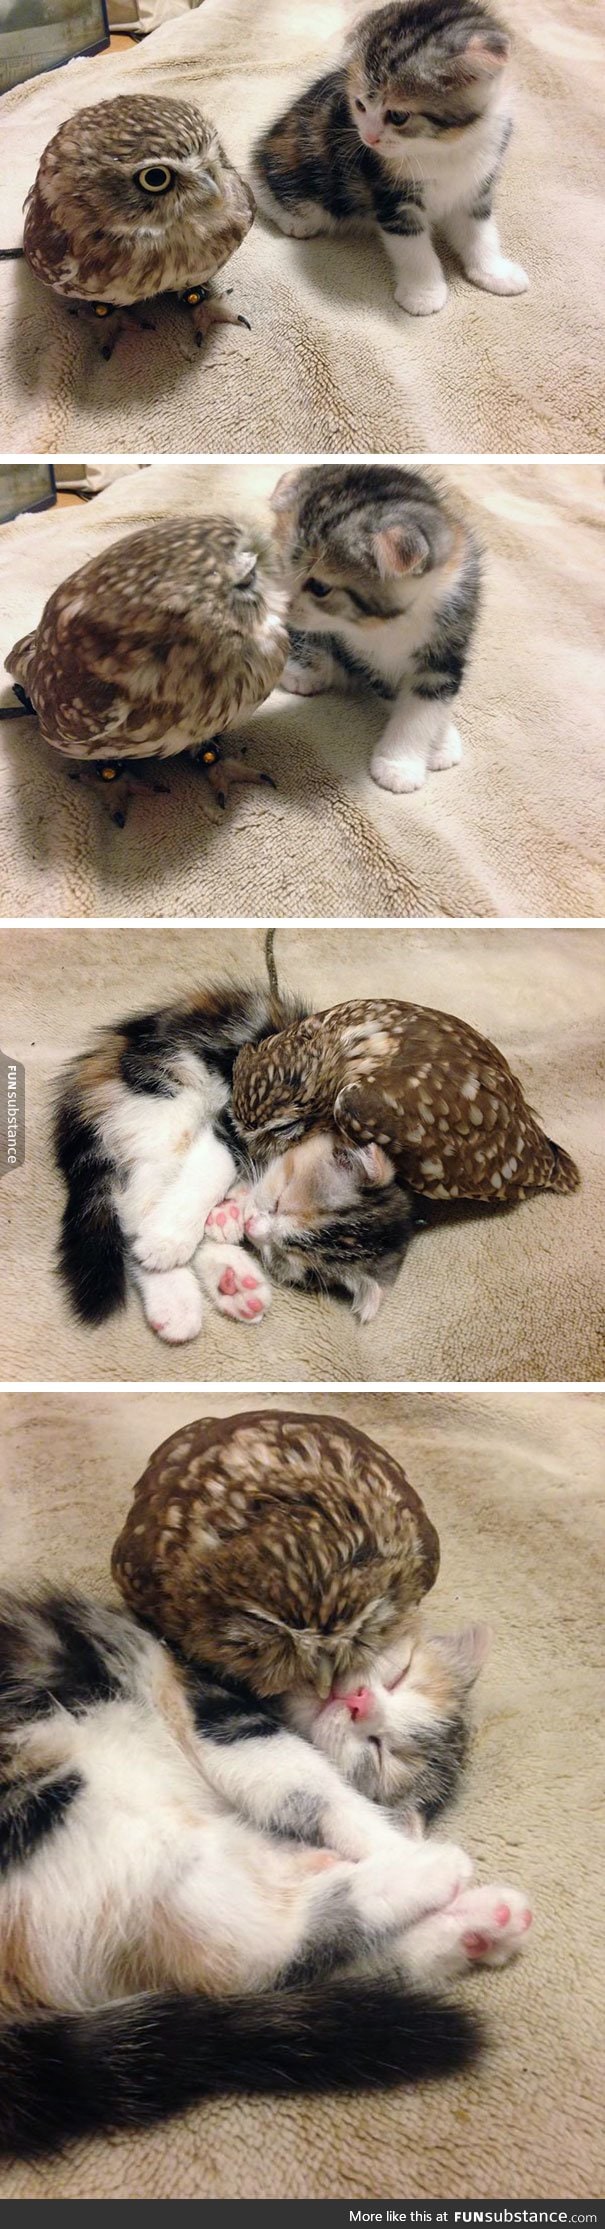 Kitten and Owlet Become Friends!